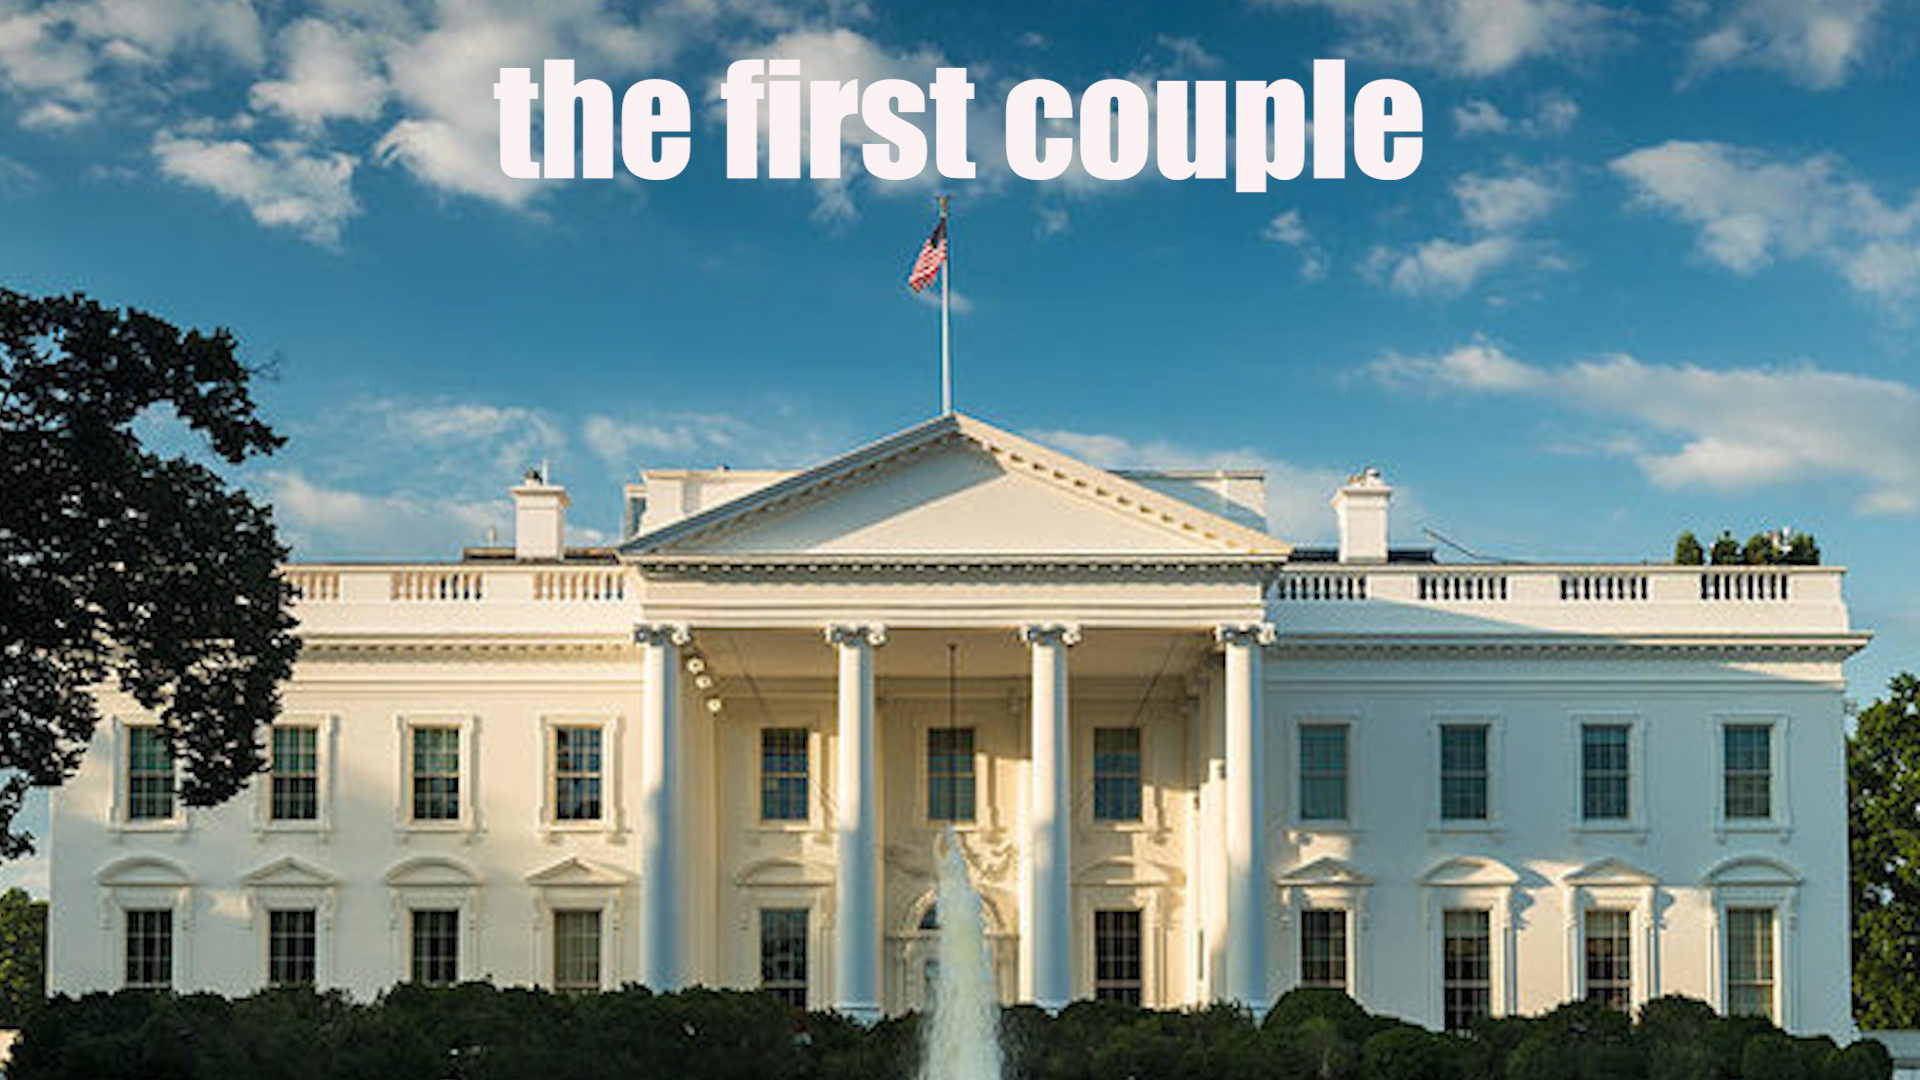 THE FIRST COUPLE  (Romantic Comedy)